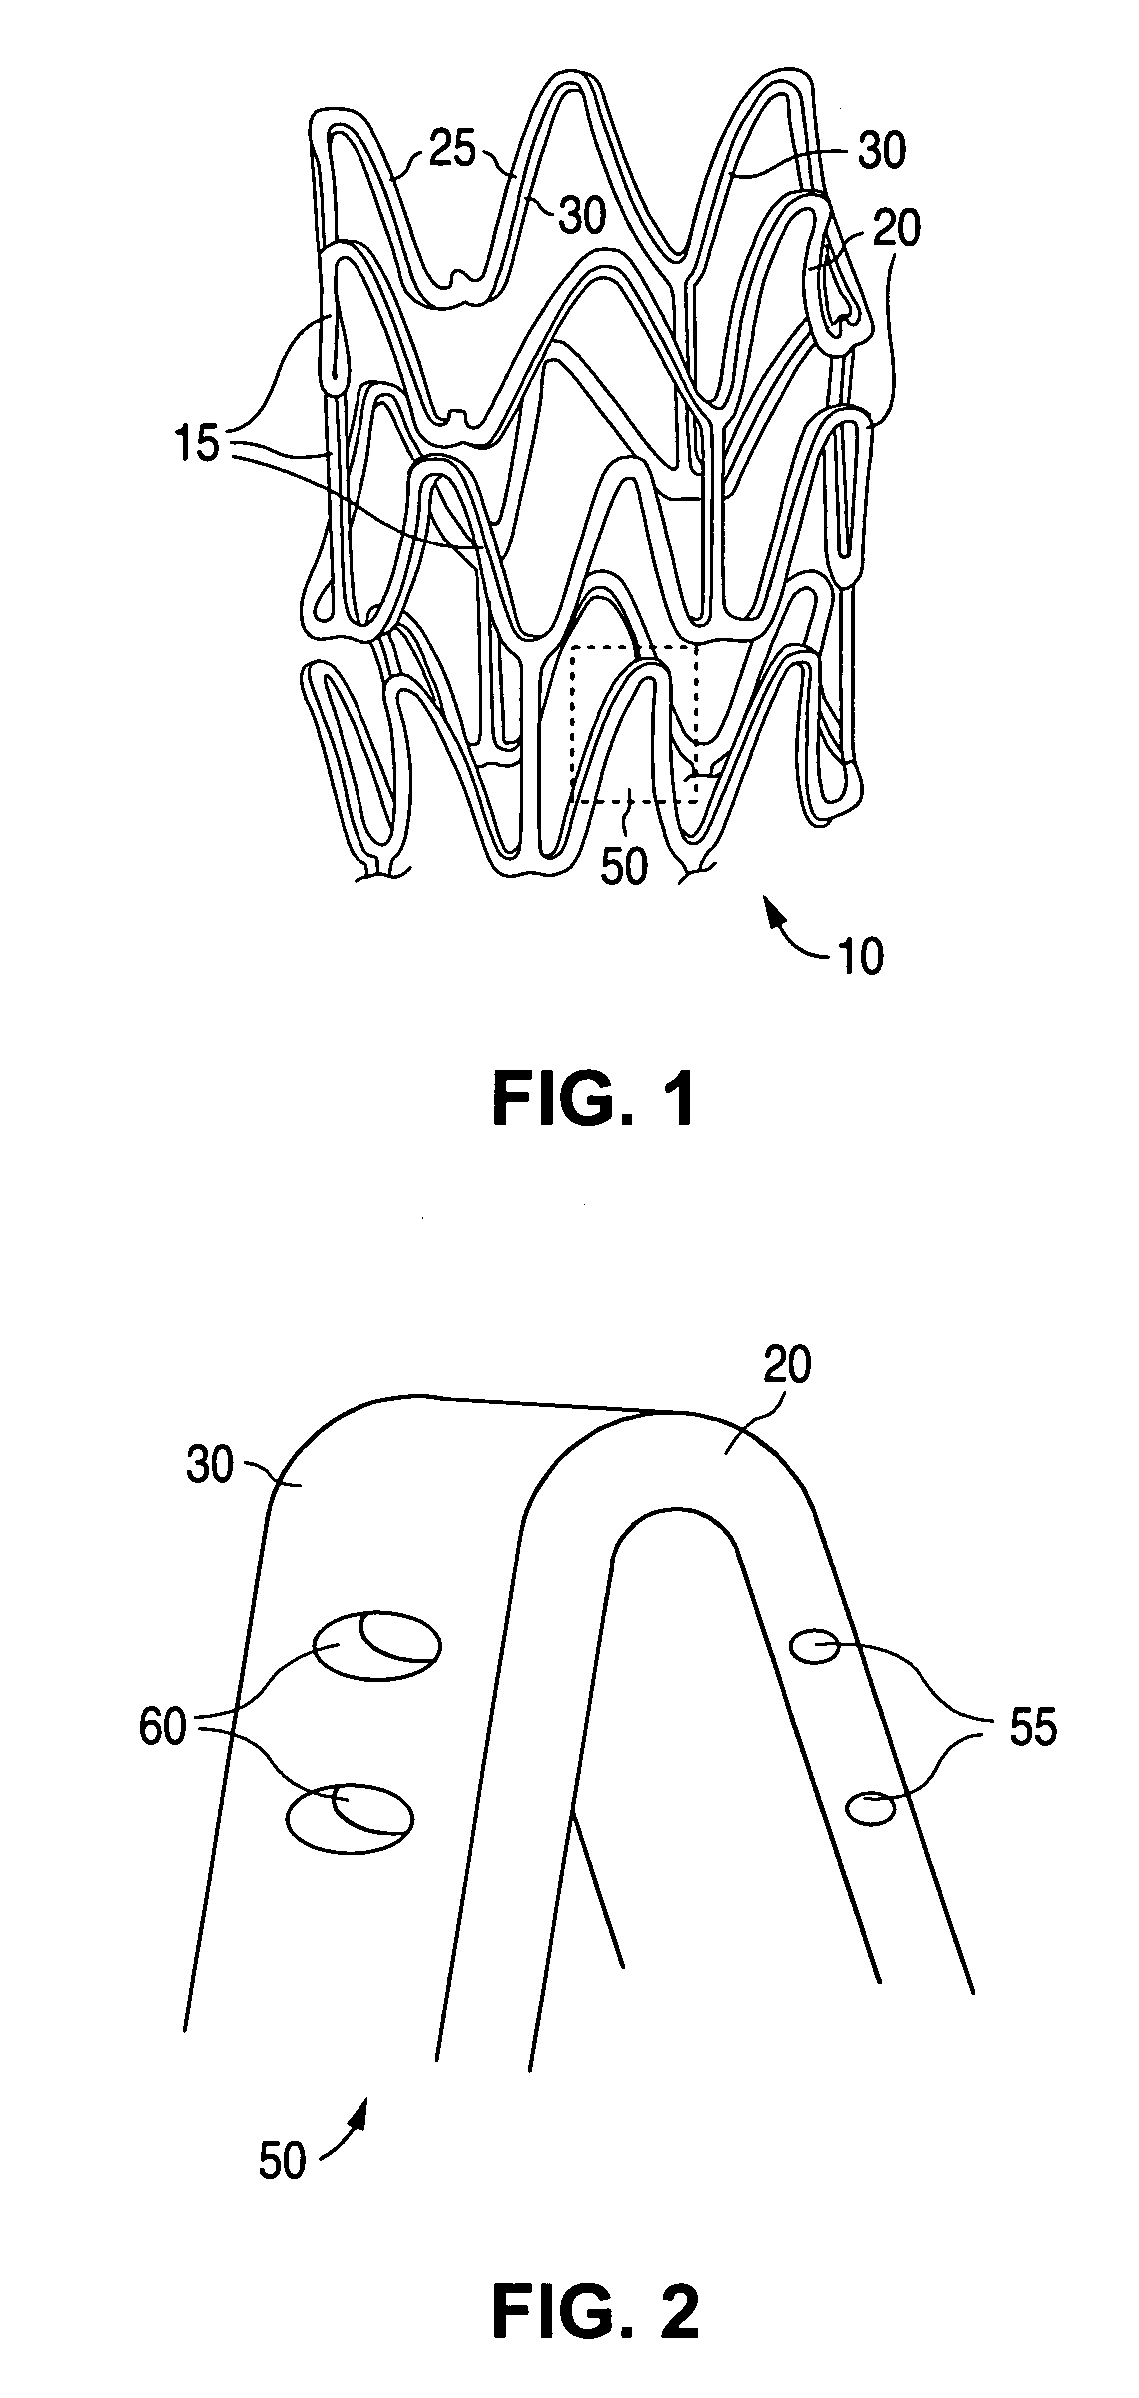 Anti-proliferative and anti-inflammatory agent combination for treatment of vascular disorders with an implantable medical device